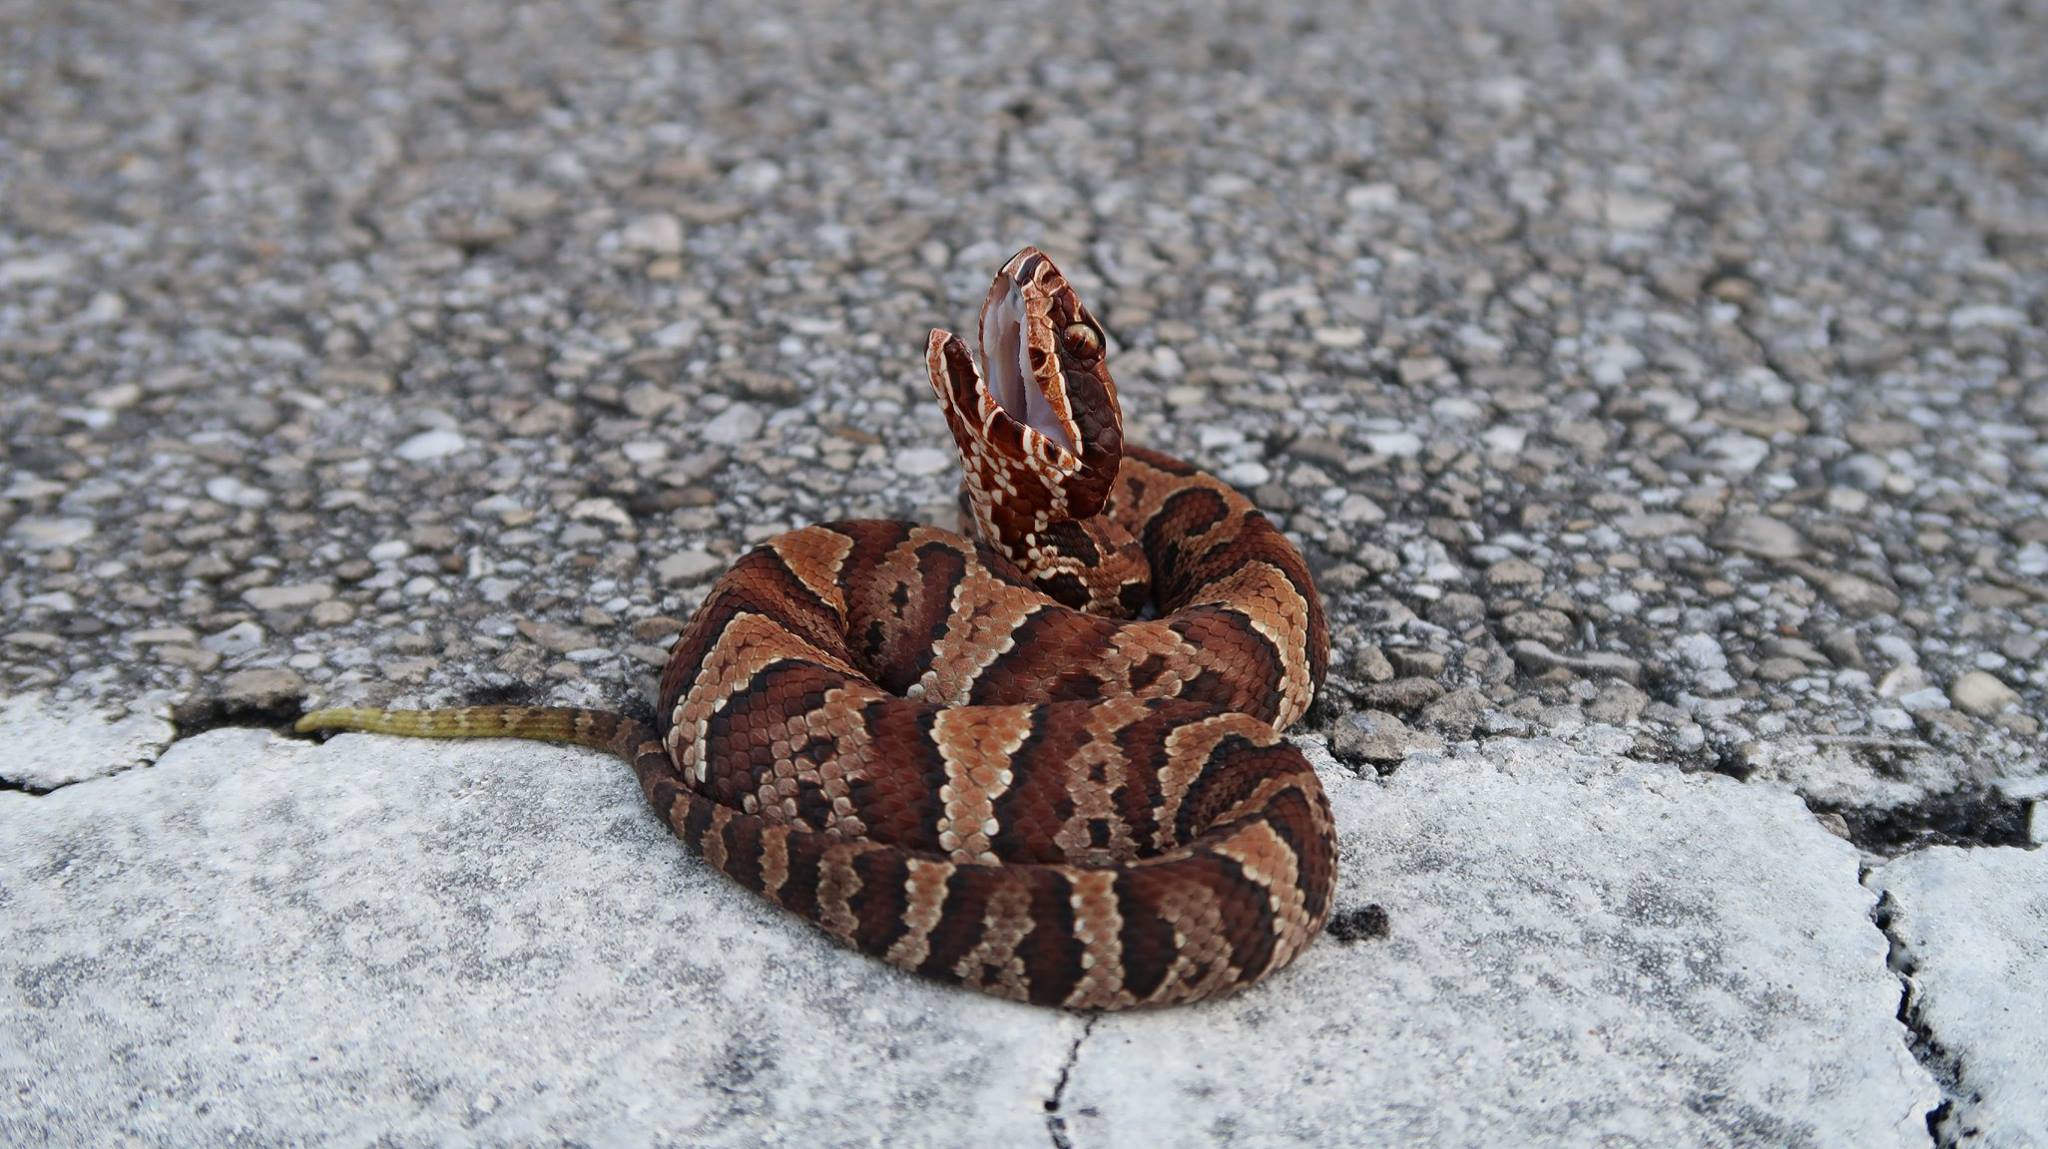 Northern Cottonmouth photo by Luke Smith